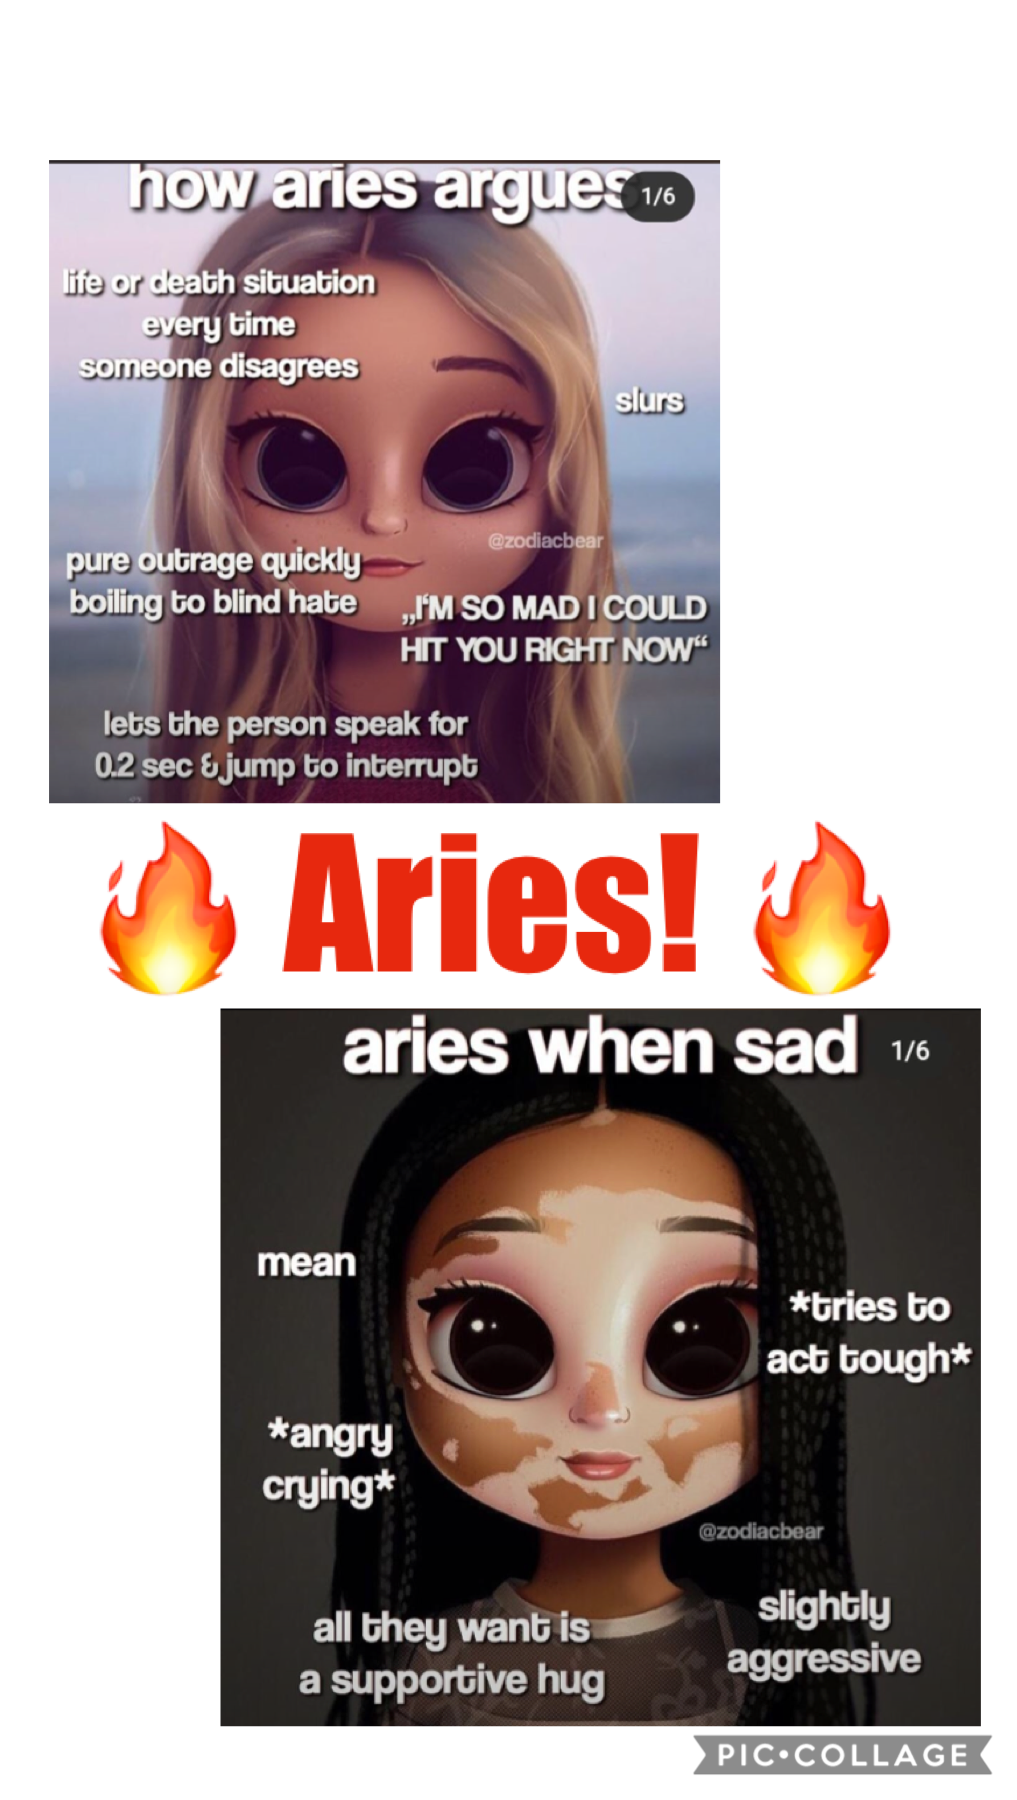 Aries ♈️🔥
What zodiac sign are you?